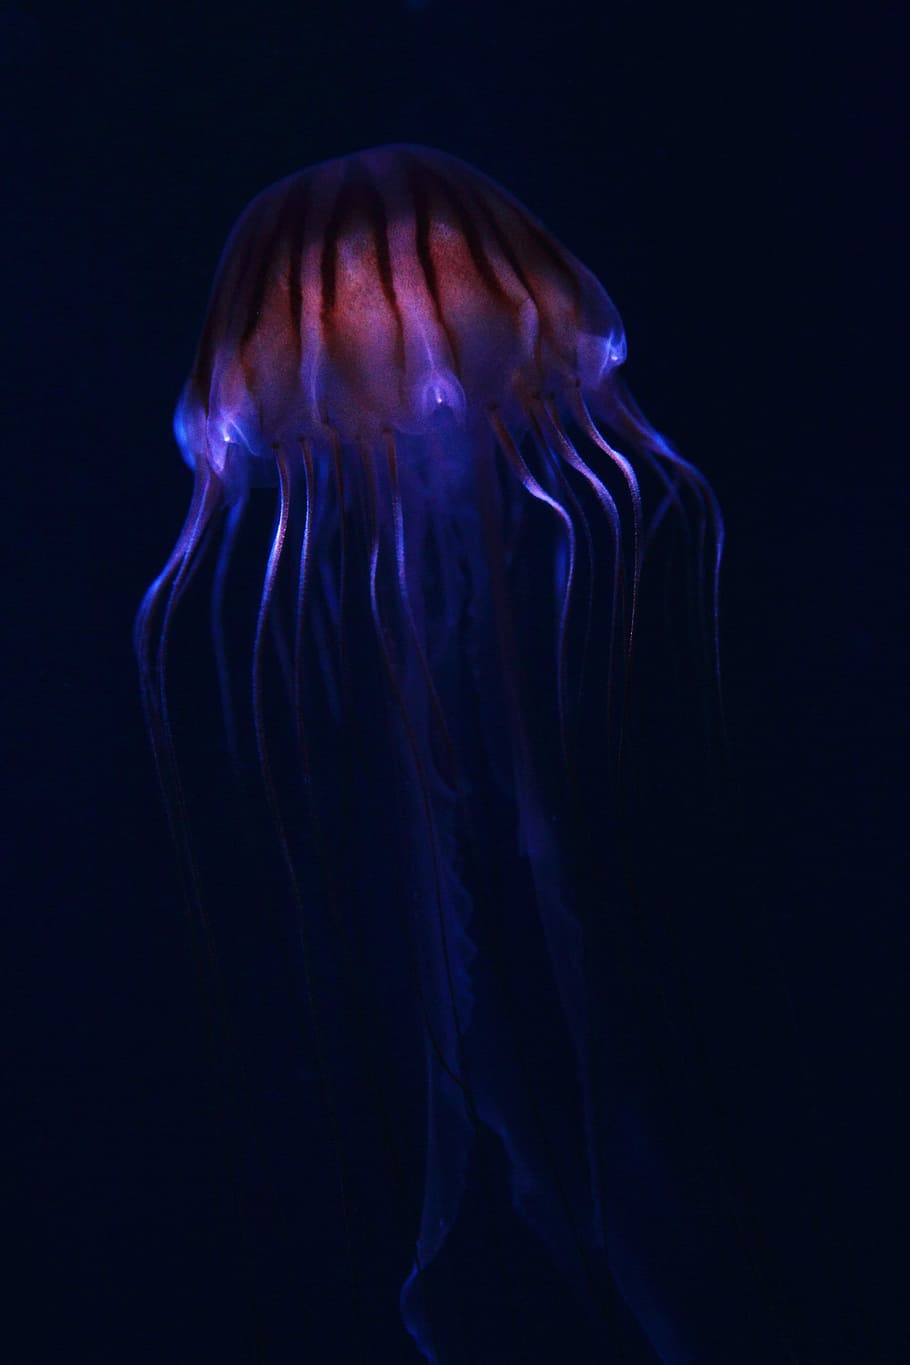 blue, maroon, digital, wallpaper, blue and red, Jelly Fish, animal, purple, creature, danger